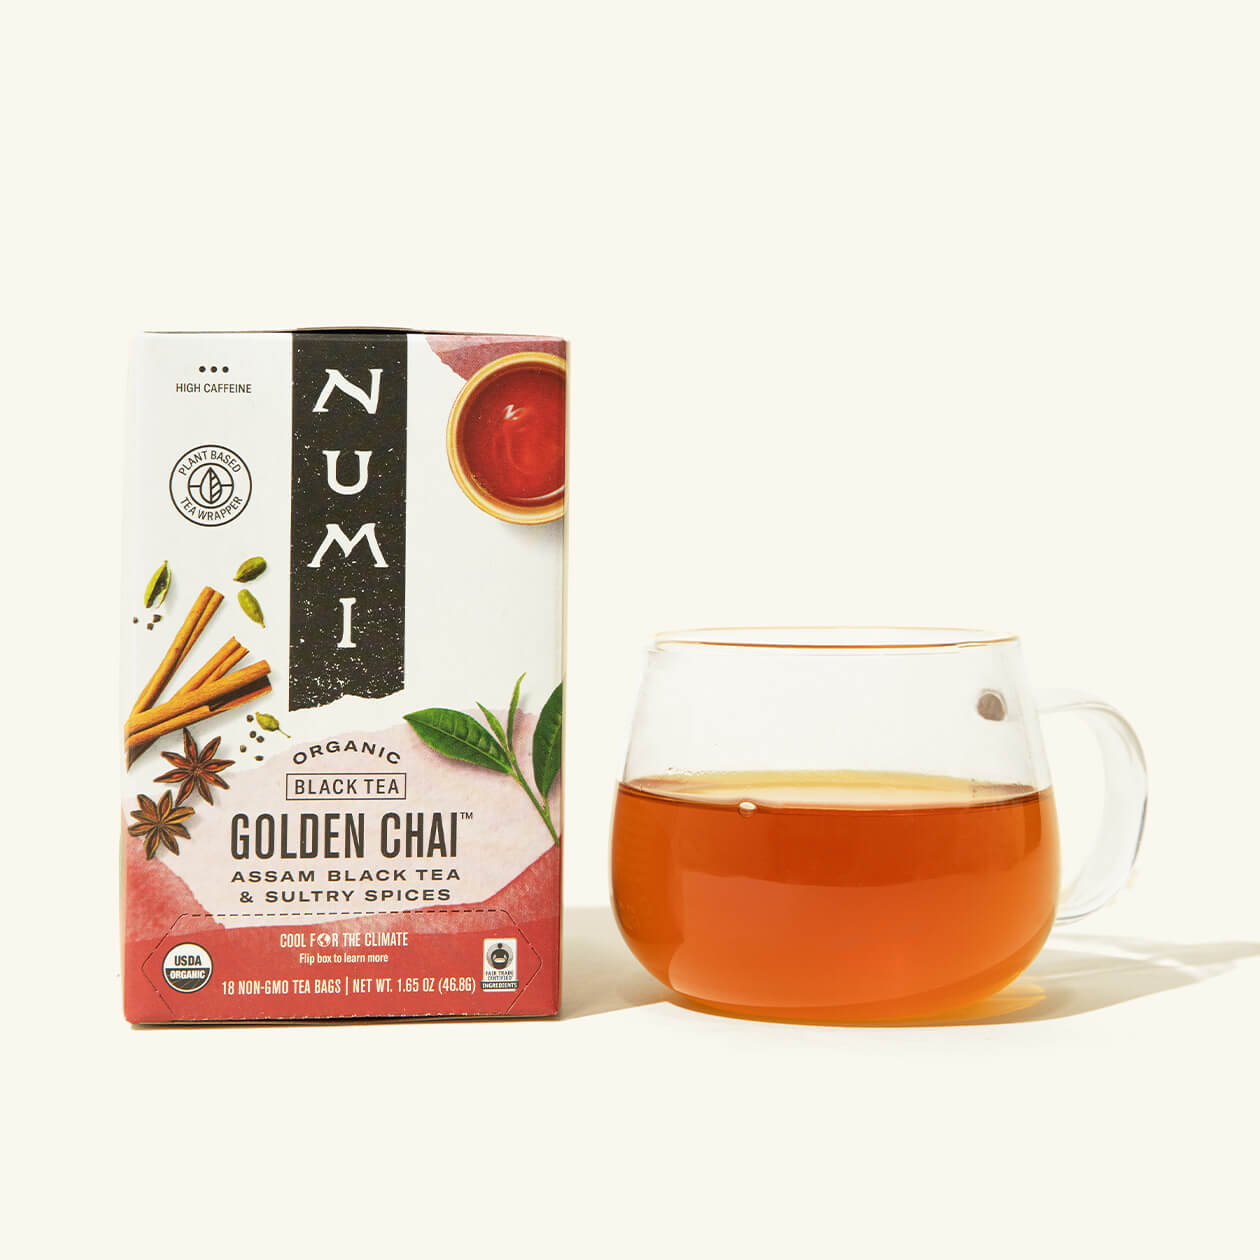 A box of Numi's Golden Chai next to a brewed cup of tea in a clear cup